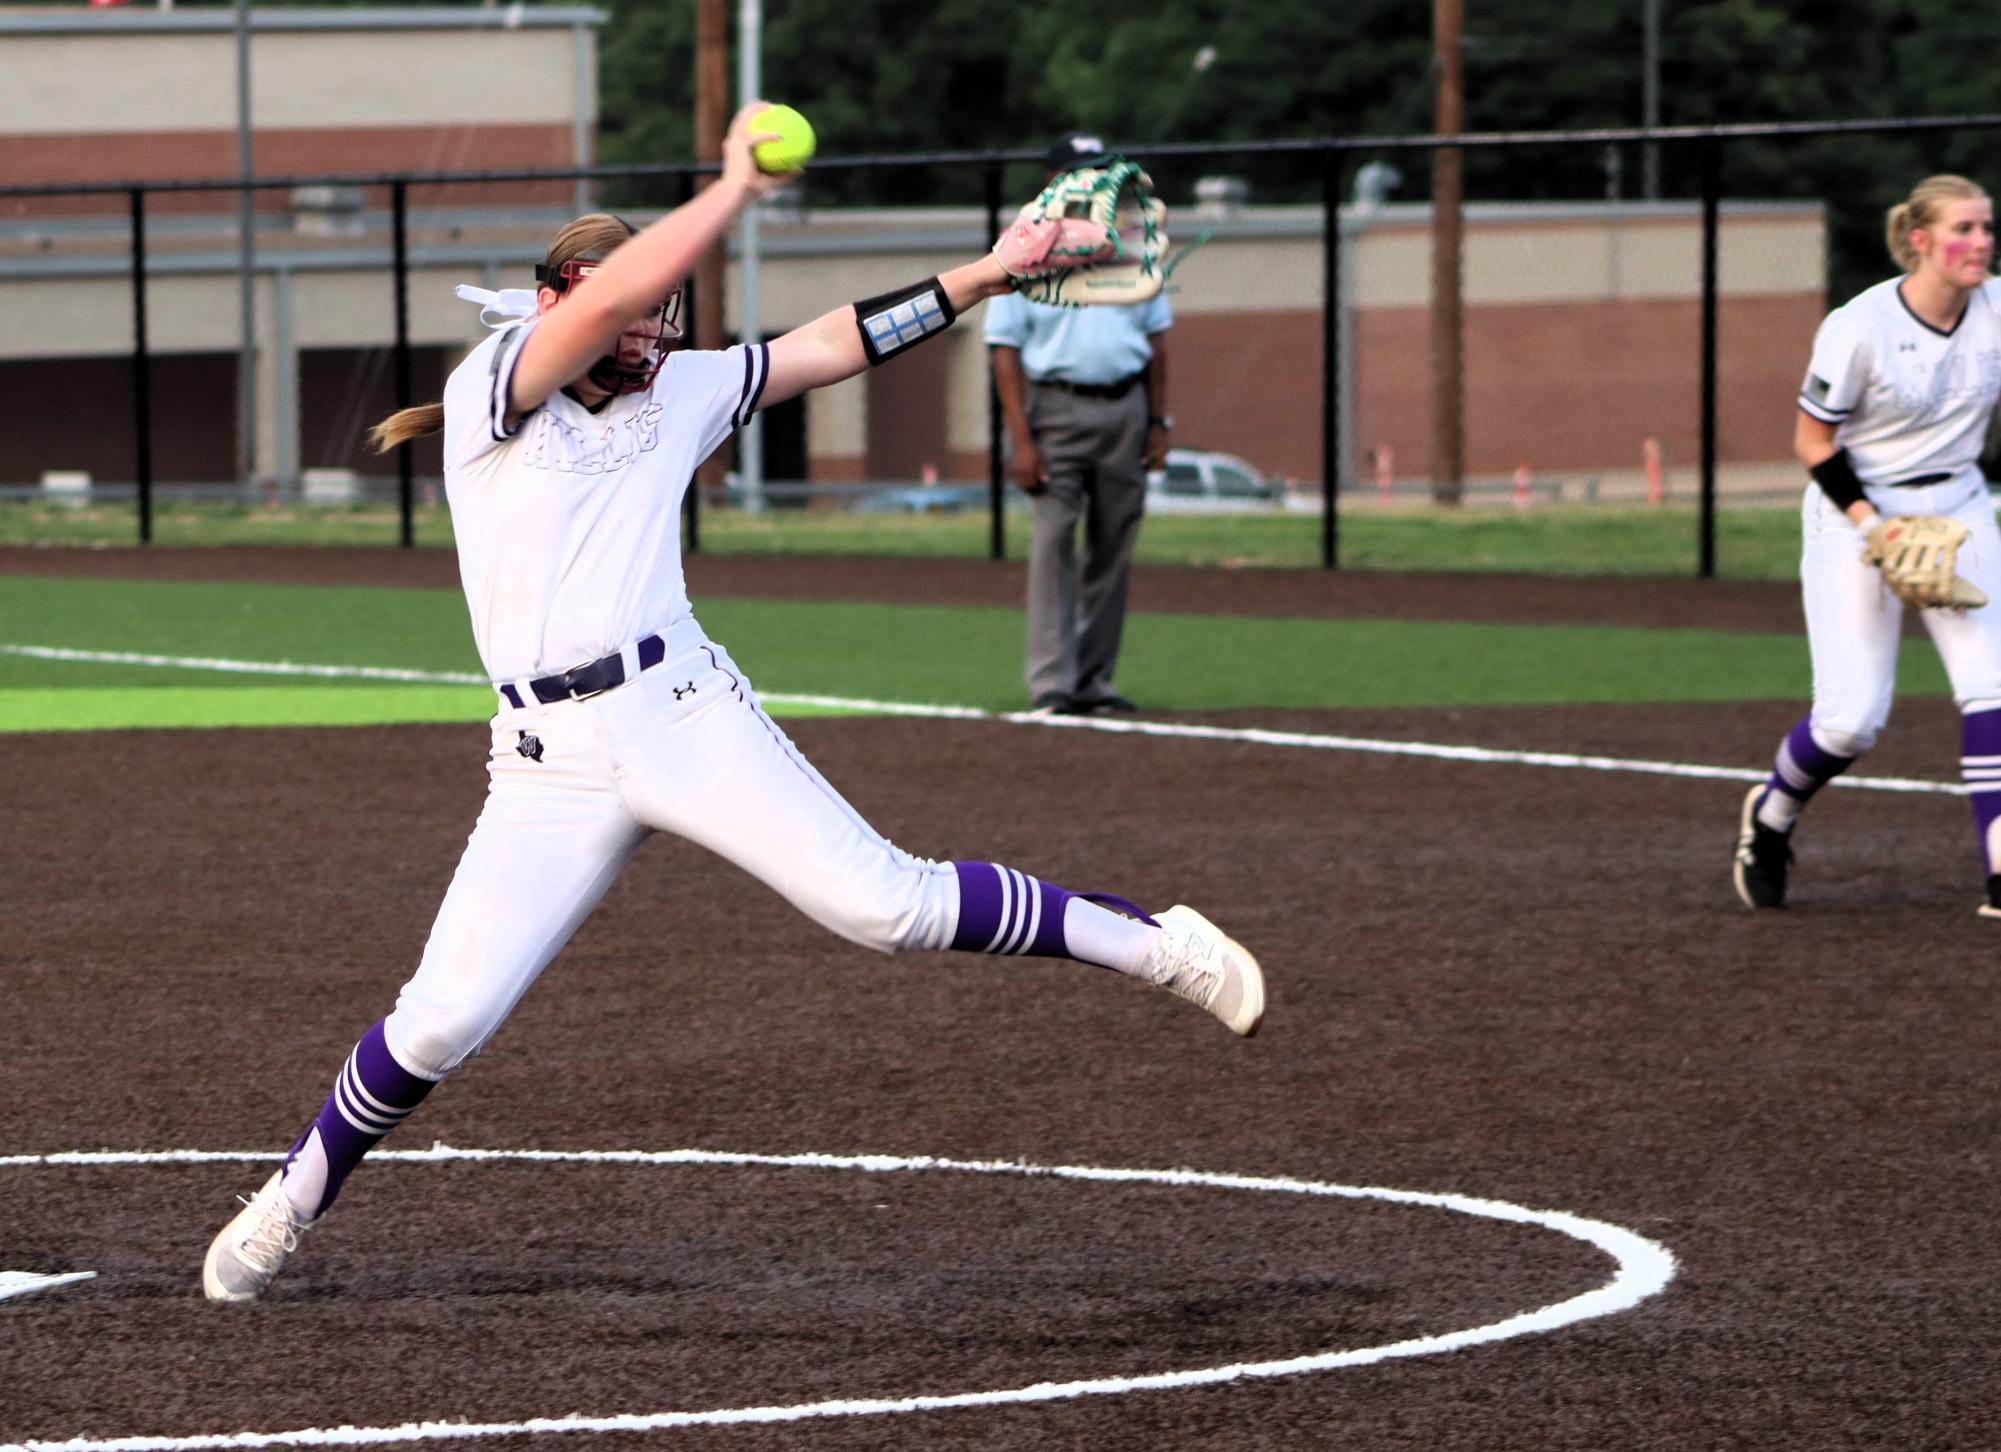 Softball team rides five-win streak for possible play-off spot